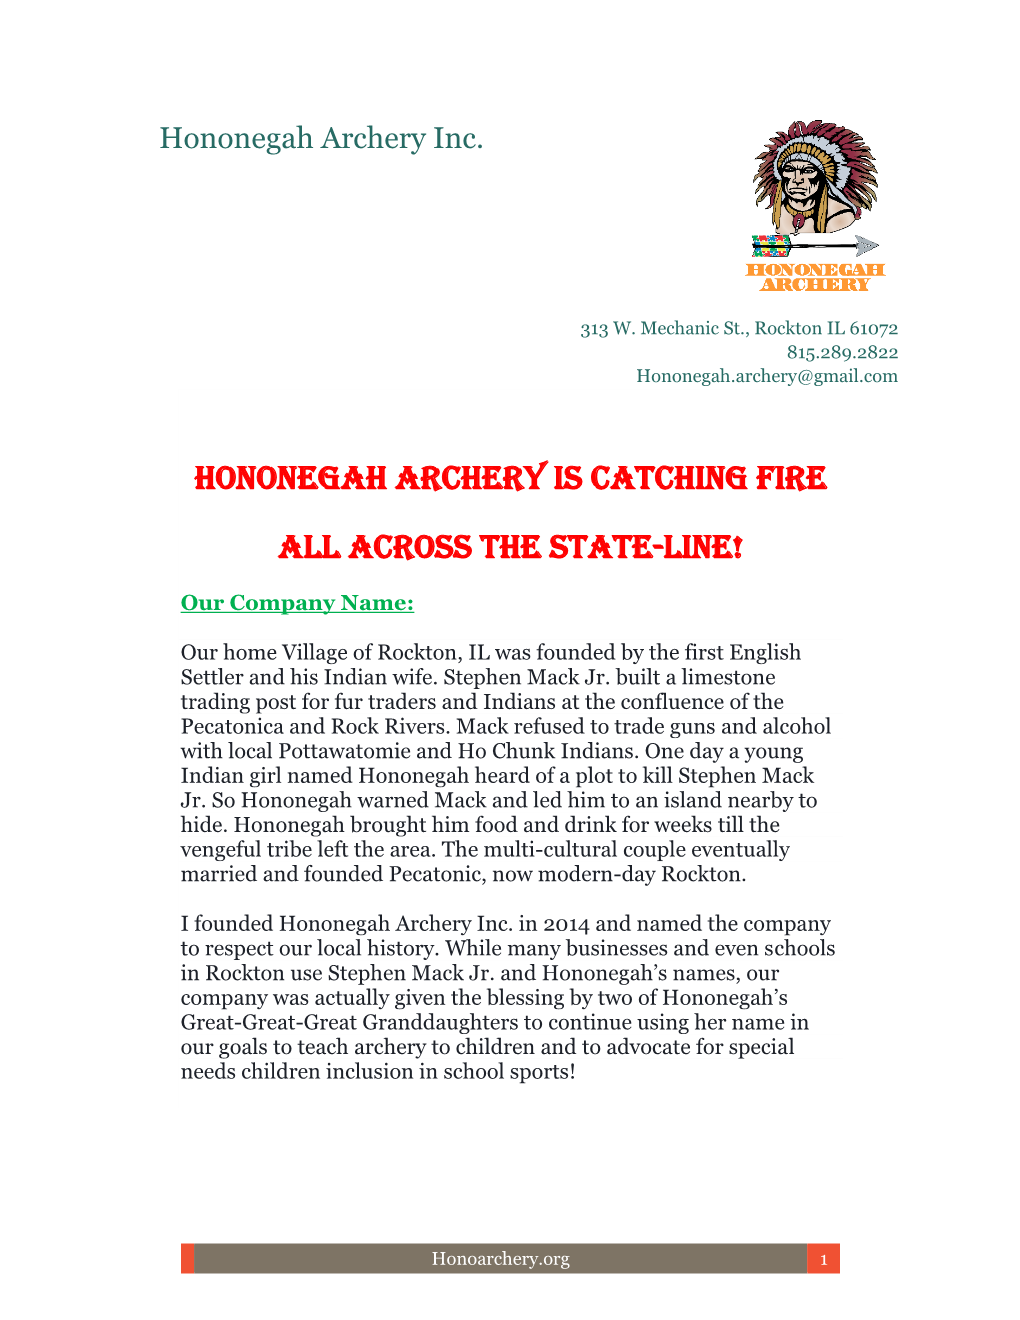 Hononegah Archery Is Catching Fire All Across the State-Line!